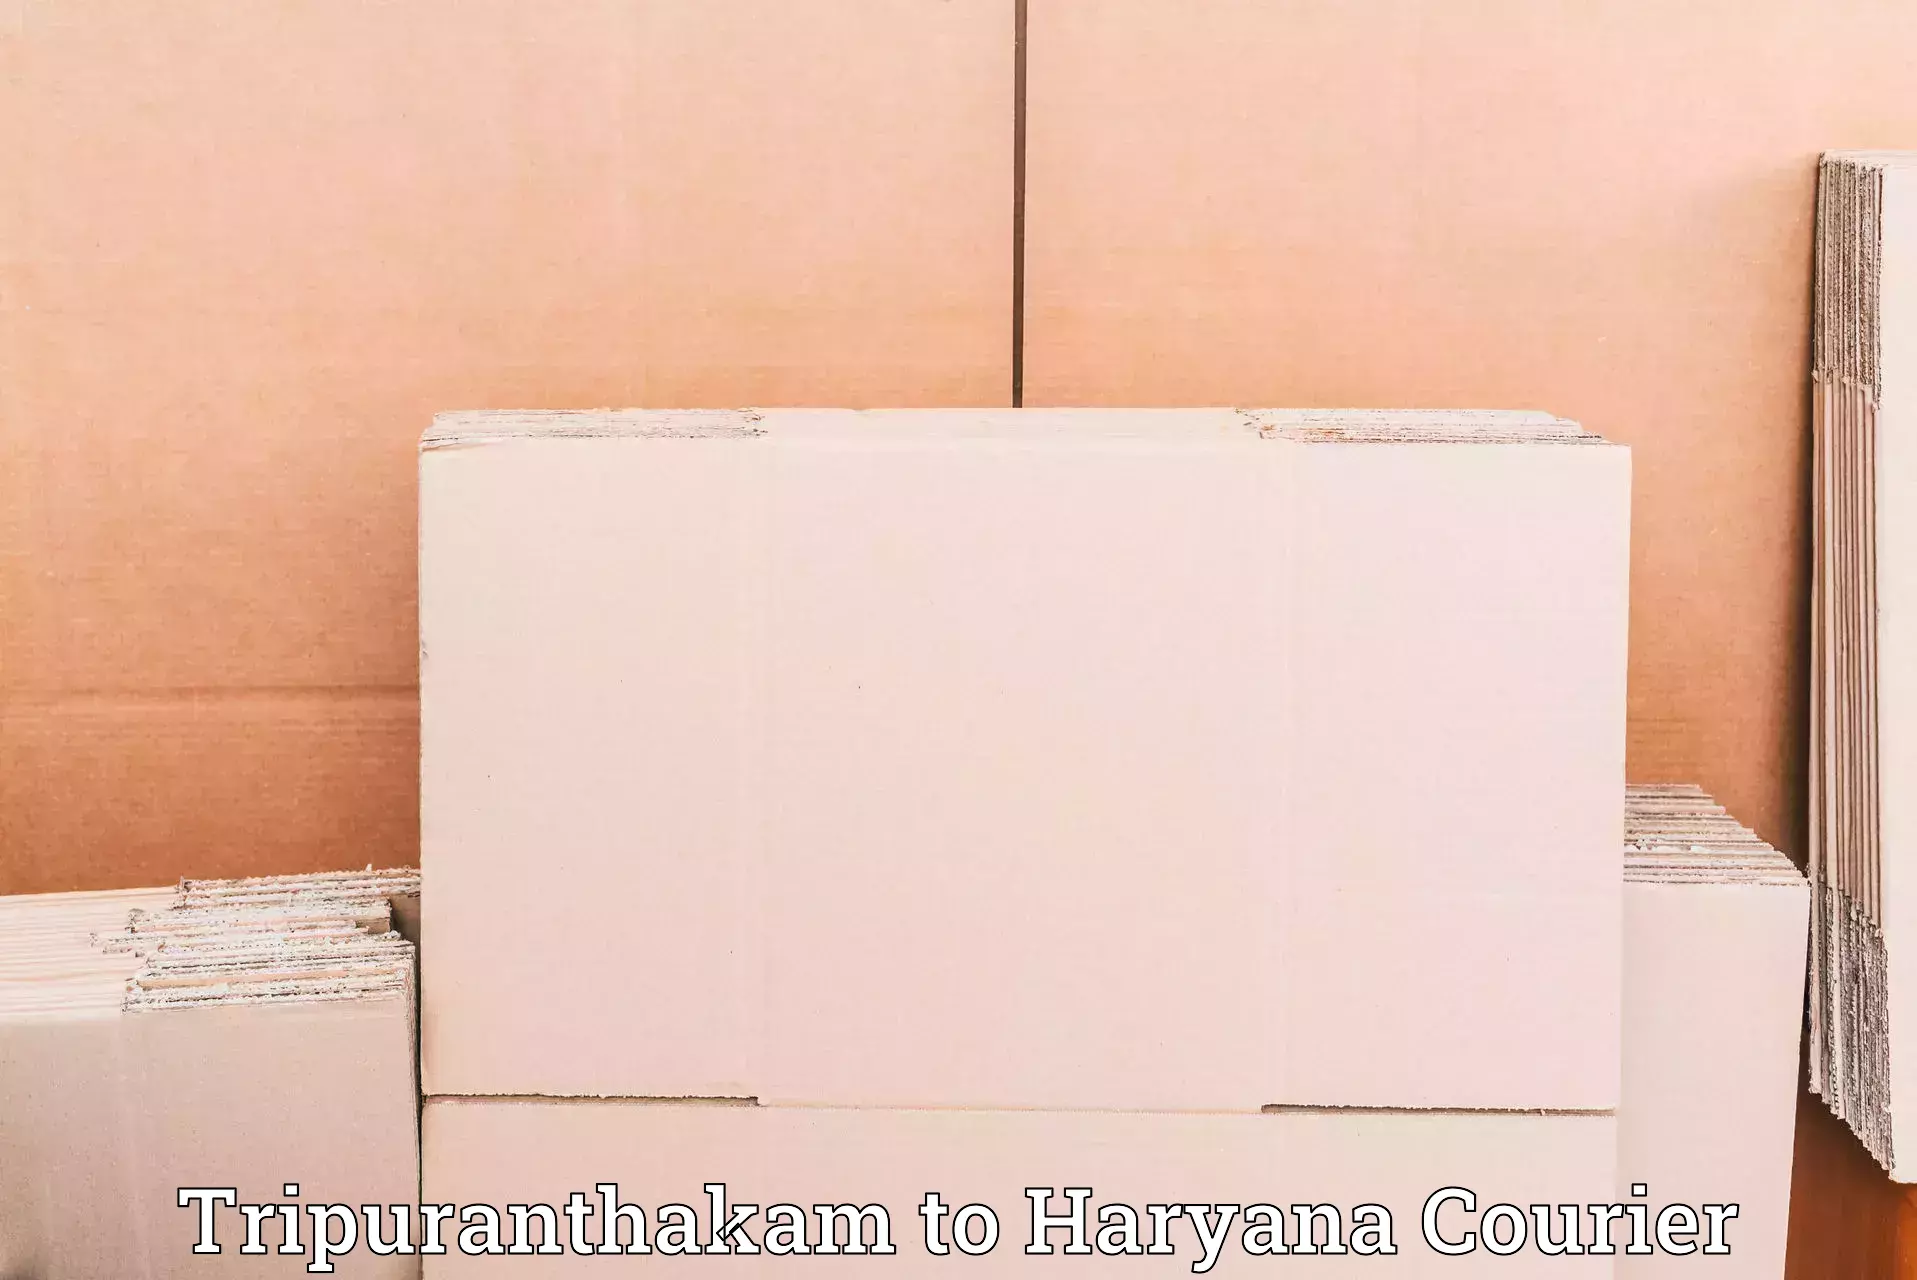 Express package services in Tripuranthakam to NCR Haryana